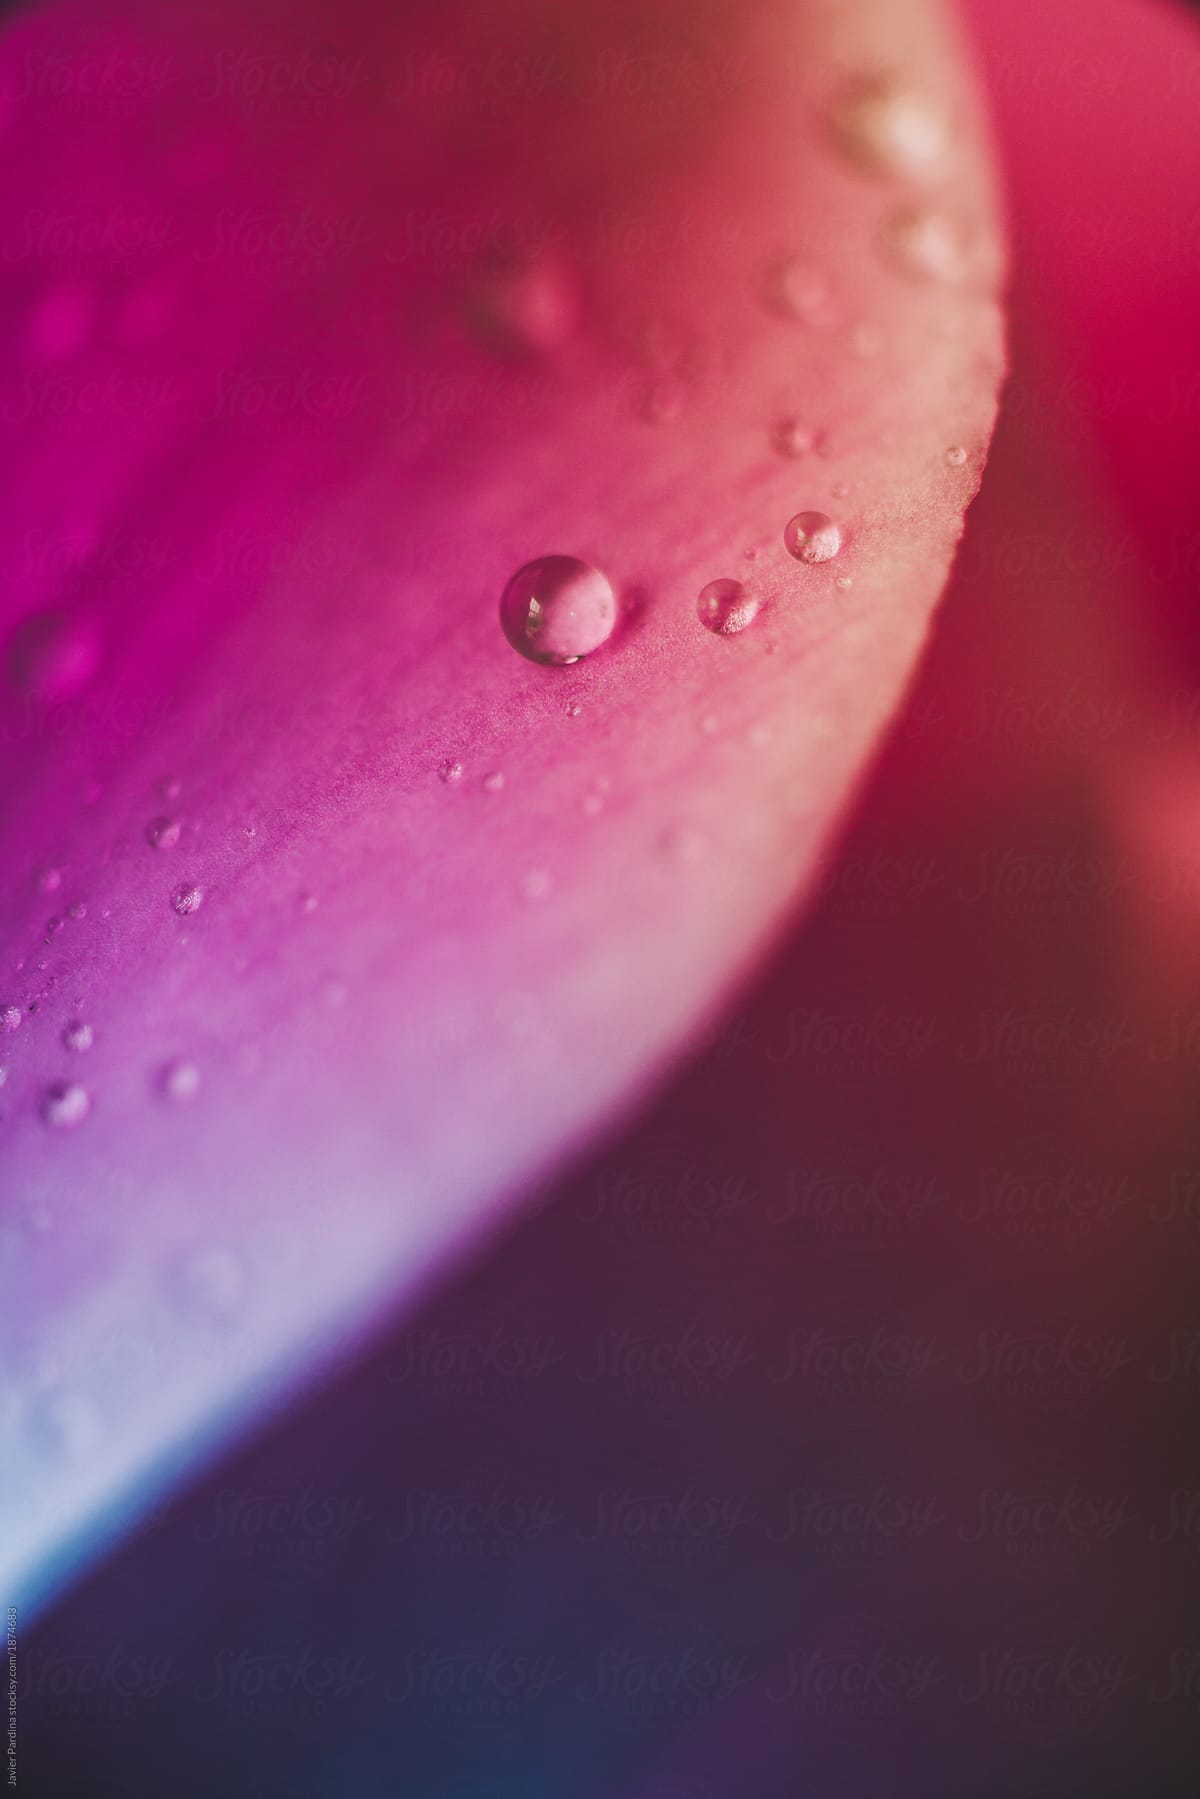 flower petals with water drops